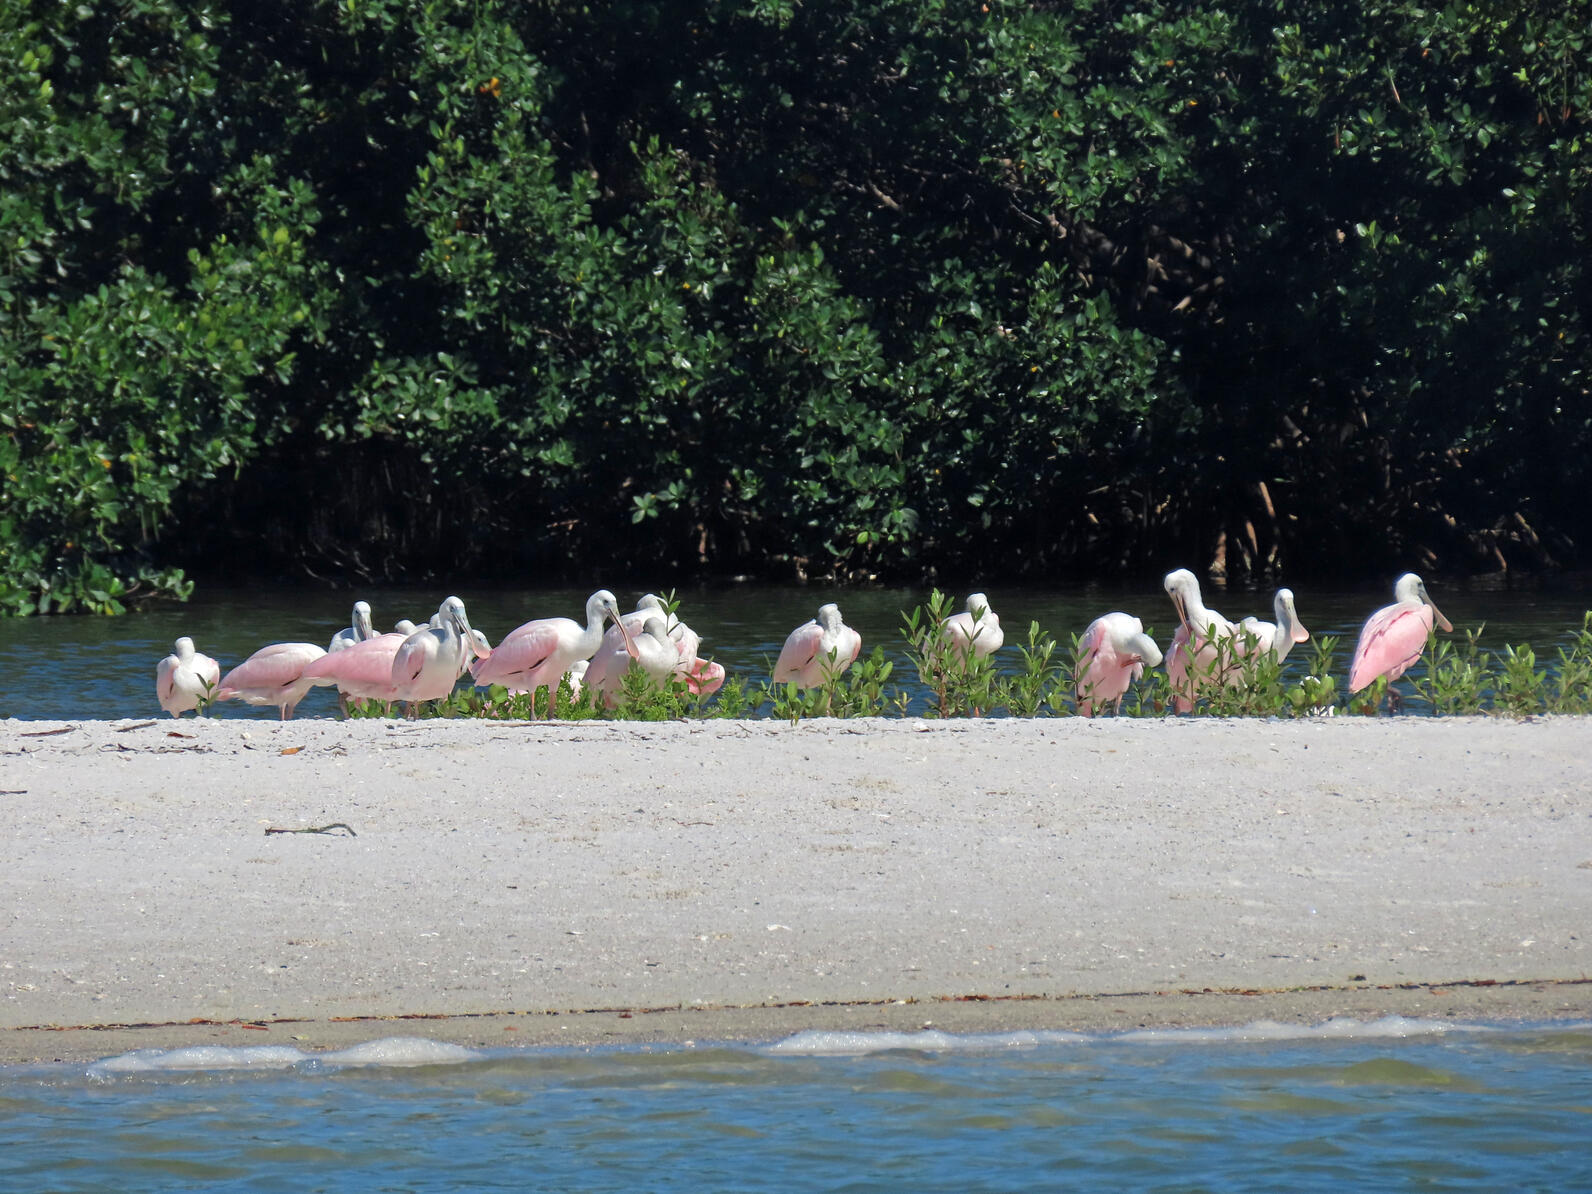 A flock of Roseate Spoonbills on a sandbar. Trees in the background.